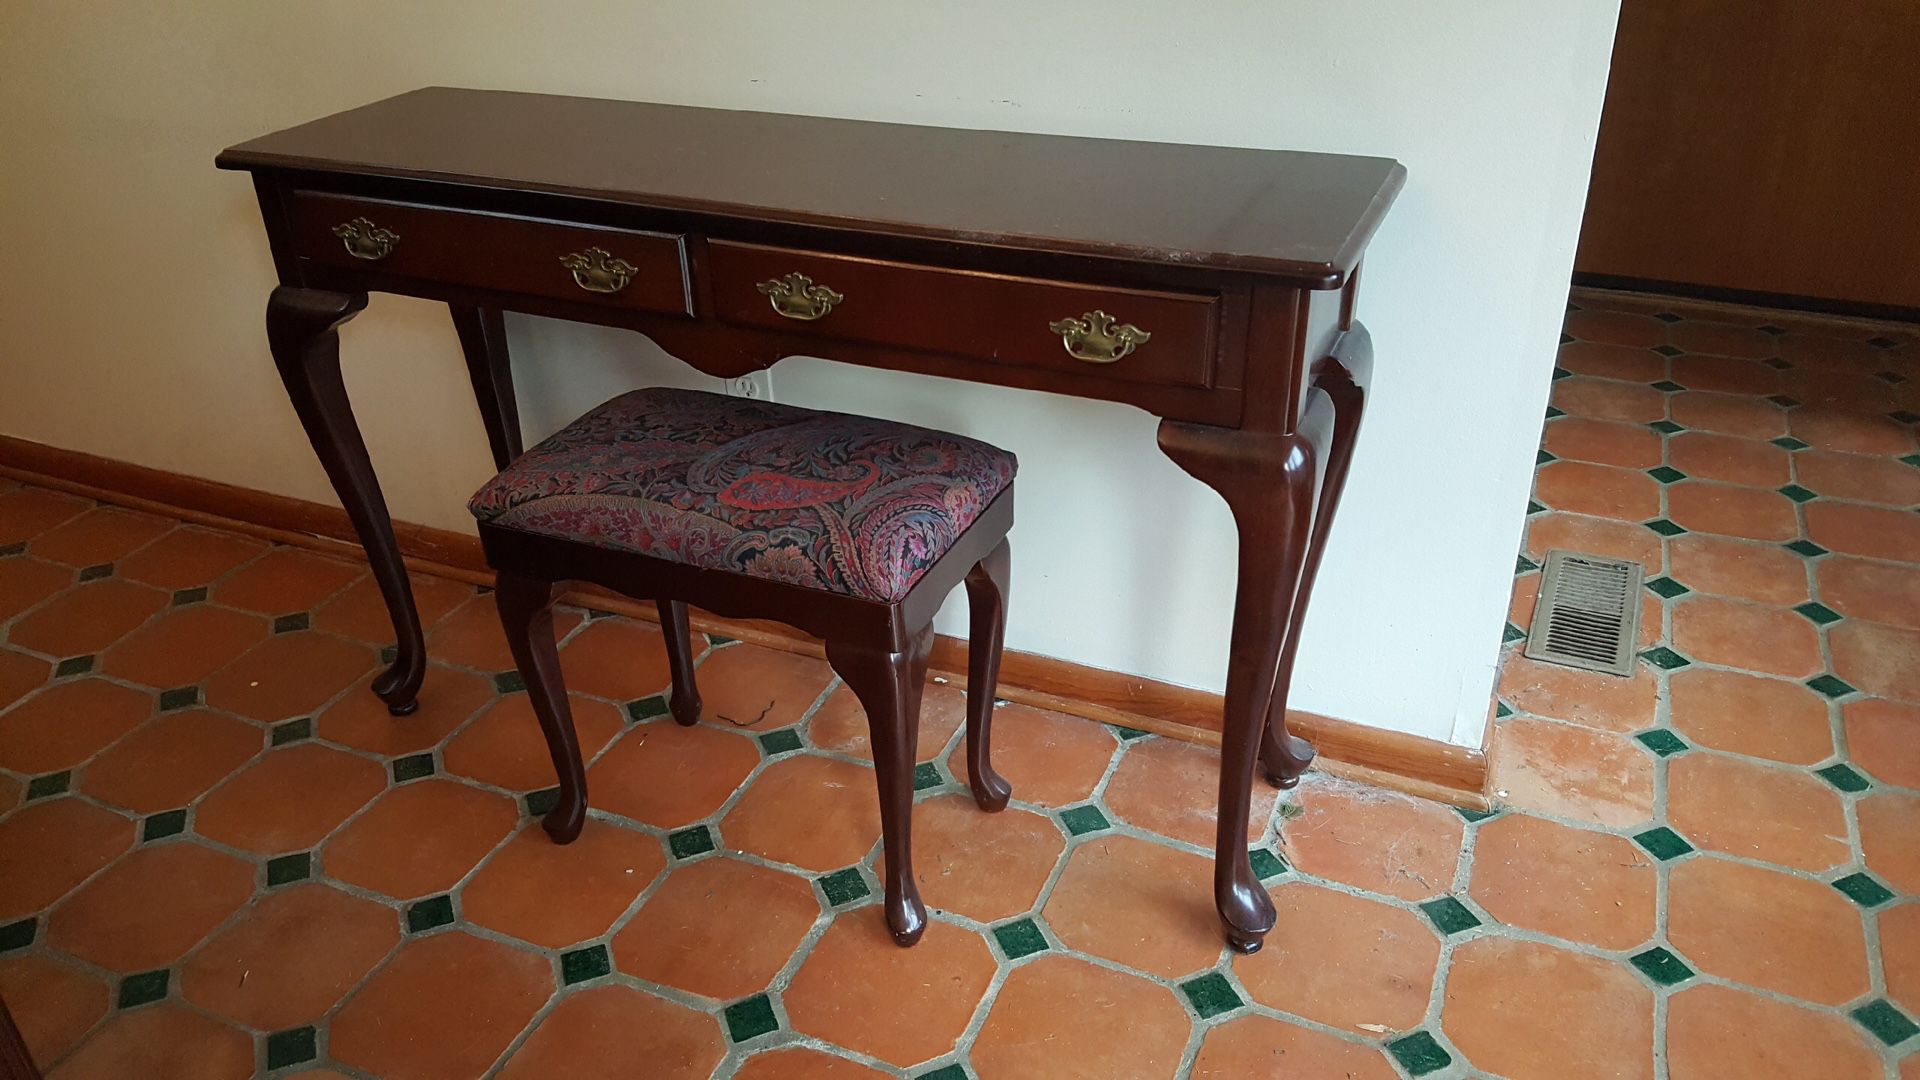 Cherry table with bench can be used in foyer as an entry table or as a dressing table.